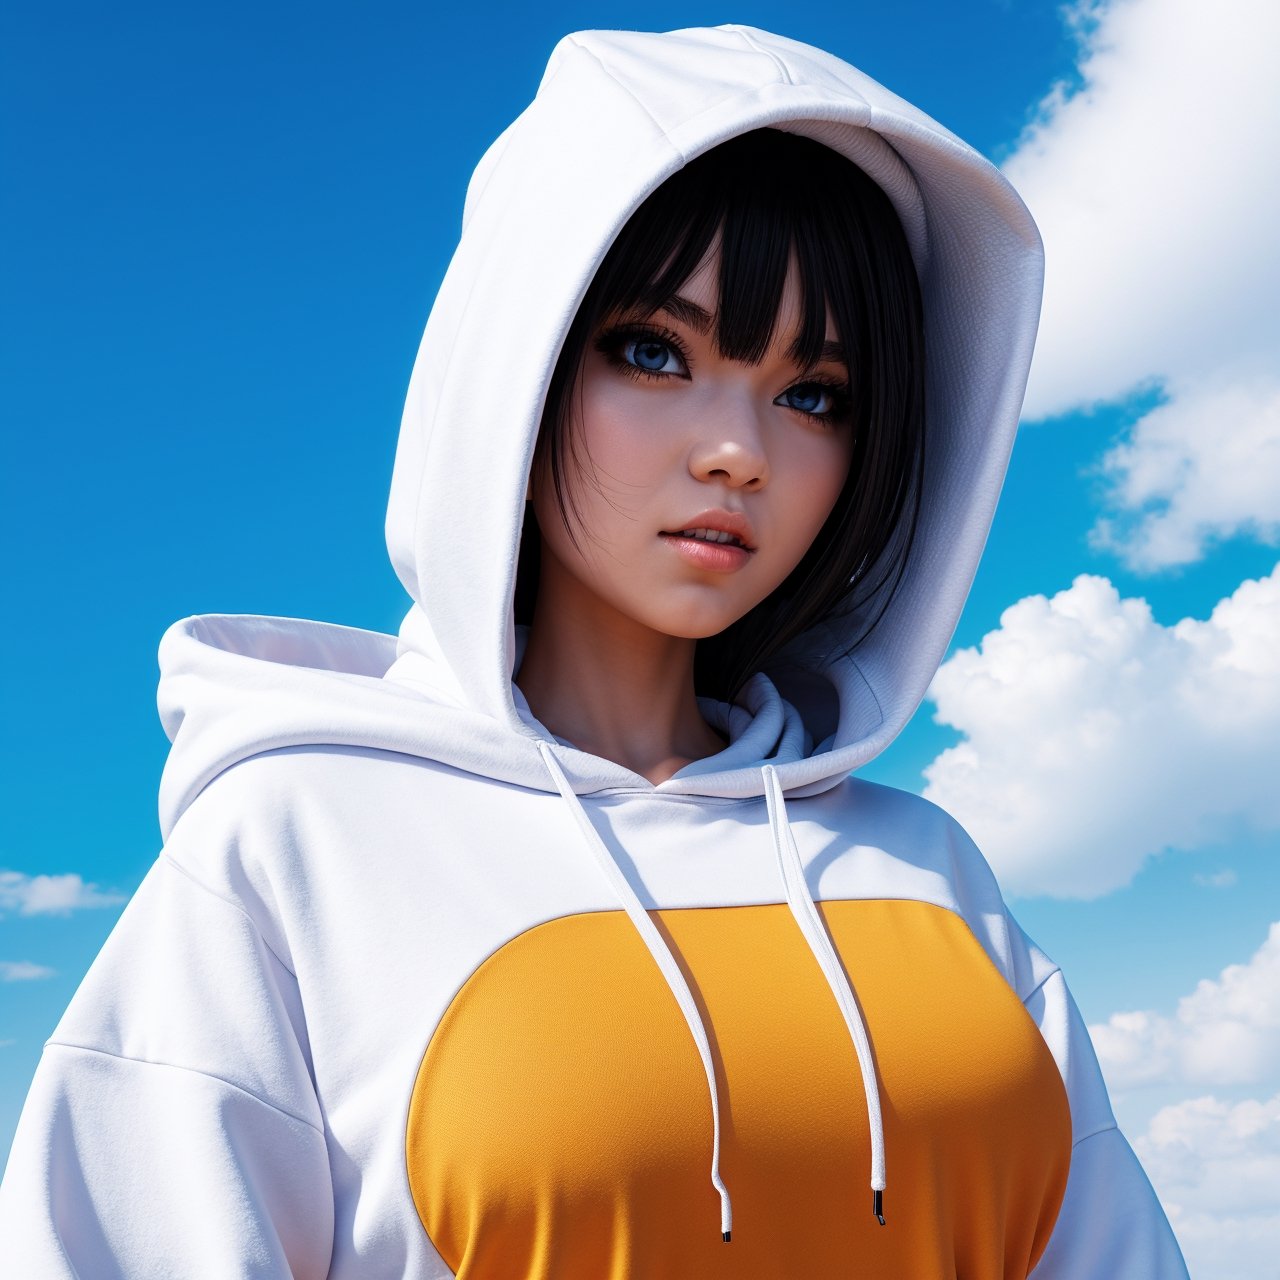 Top Quality, Masterpiece, High Resolution, 8k, Hoodie and Anime Style Girl, One Girl, Detailed Line Art, Bright White and Bright Amber Style, Digital Enhancement, Close Up, Anime Core, Flowing Fabric